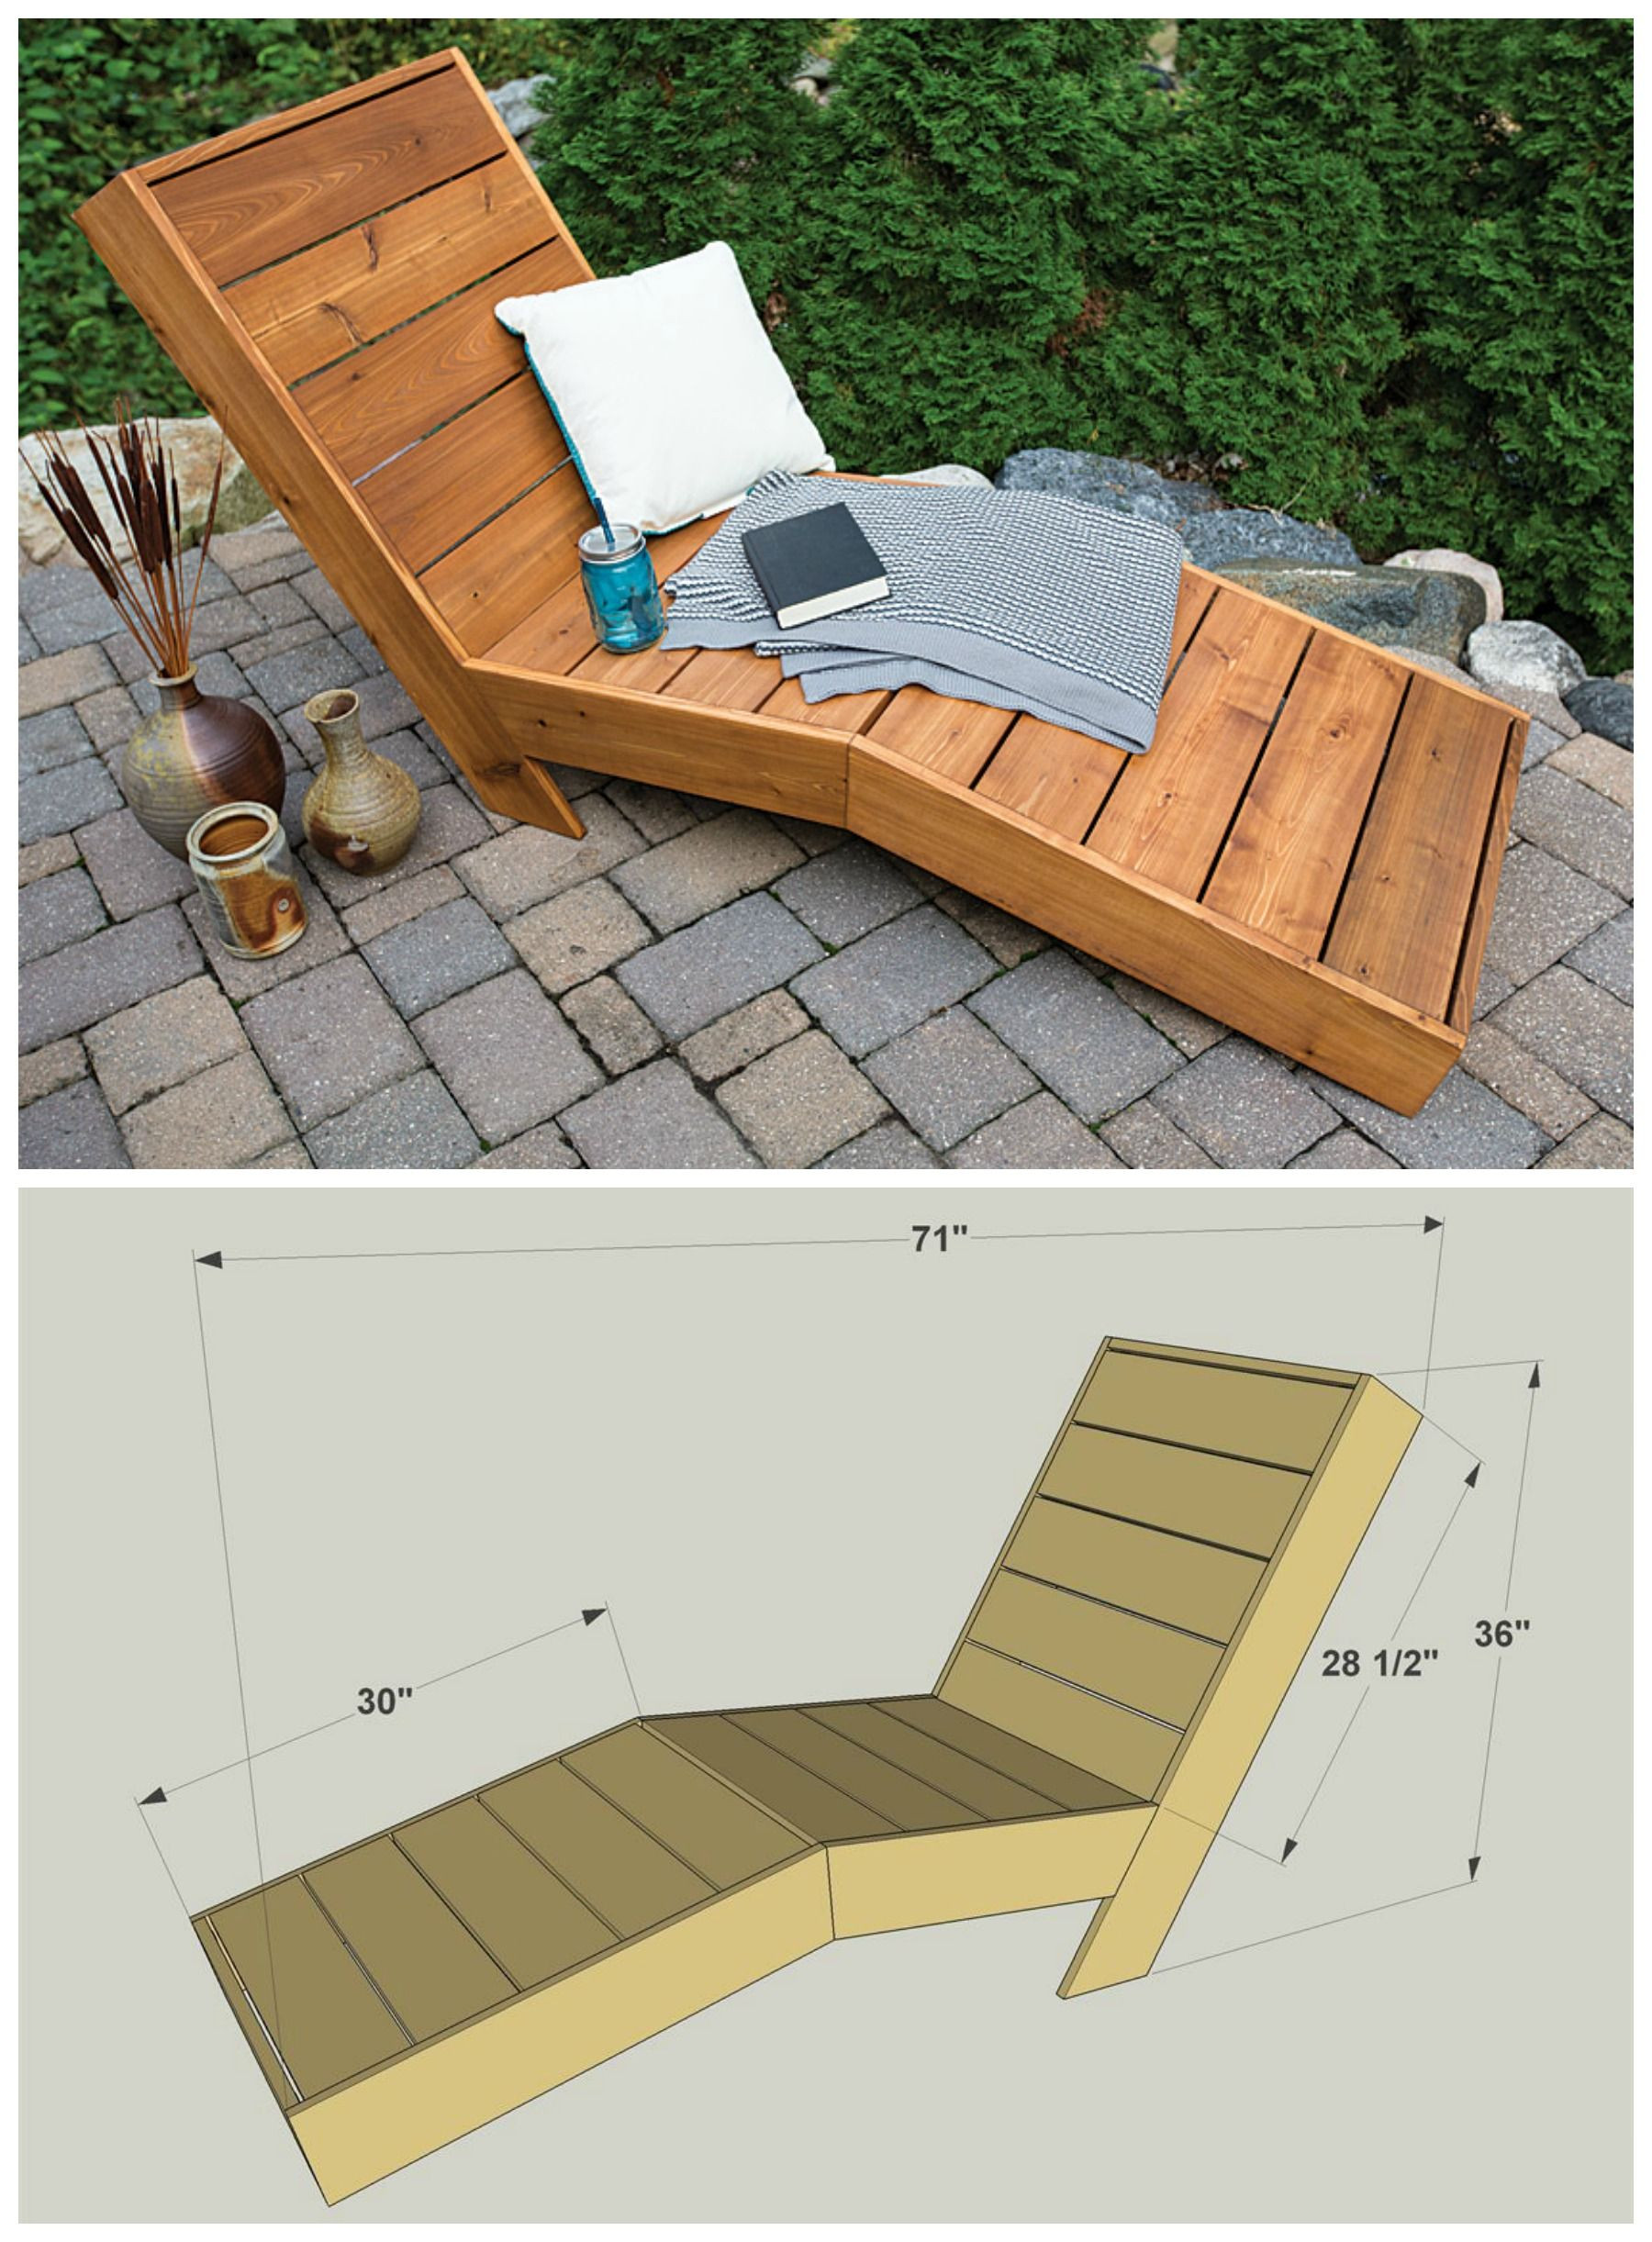 Free DIY Outdoor Furniture Plans
 DIY Outdoor Chaise Lounge FREE PLANS at buildsomething